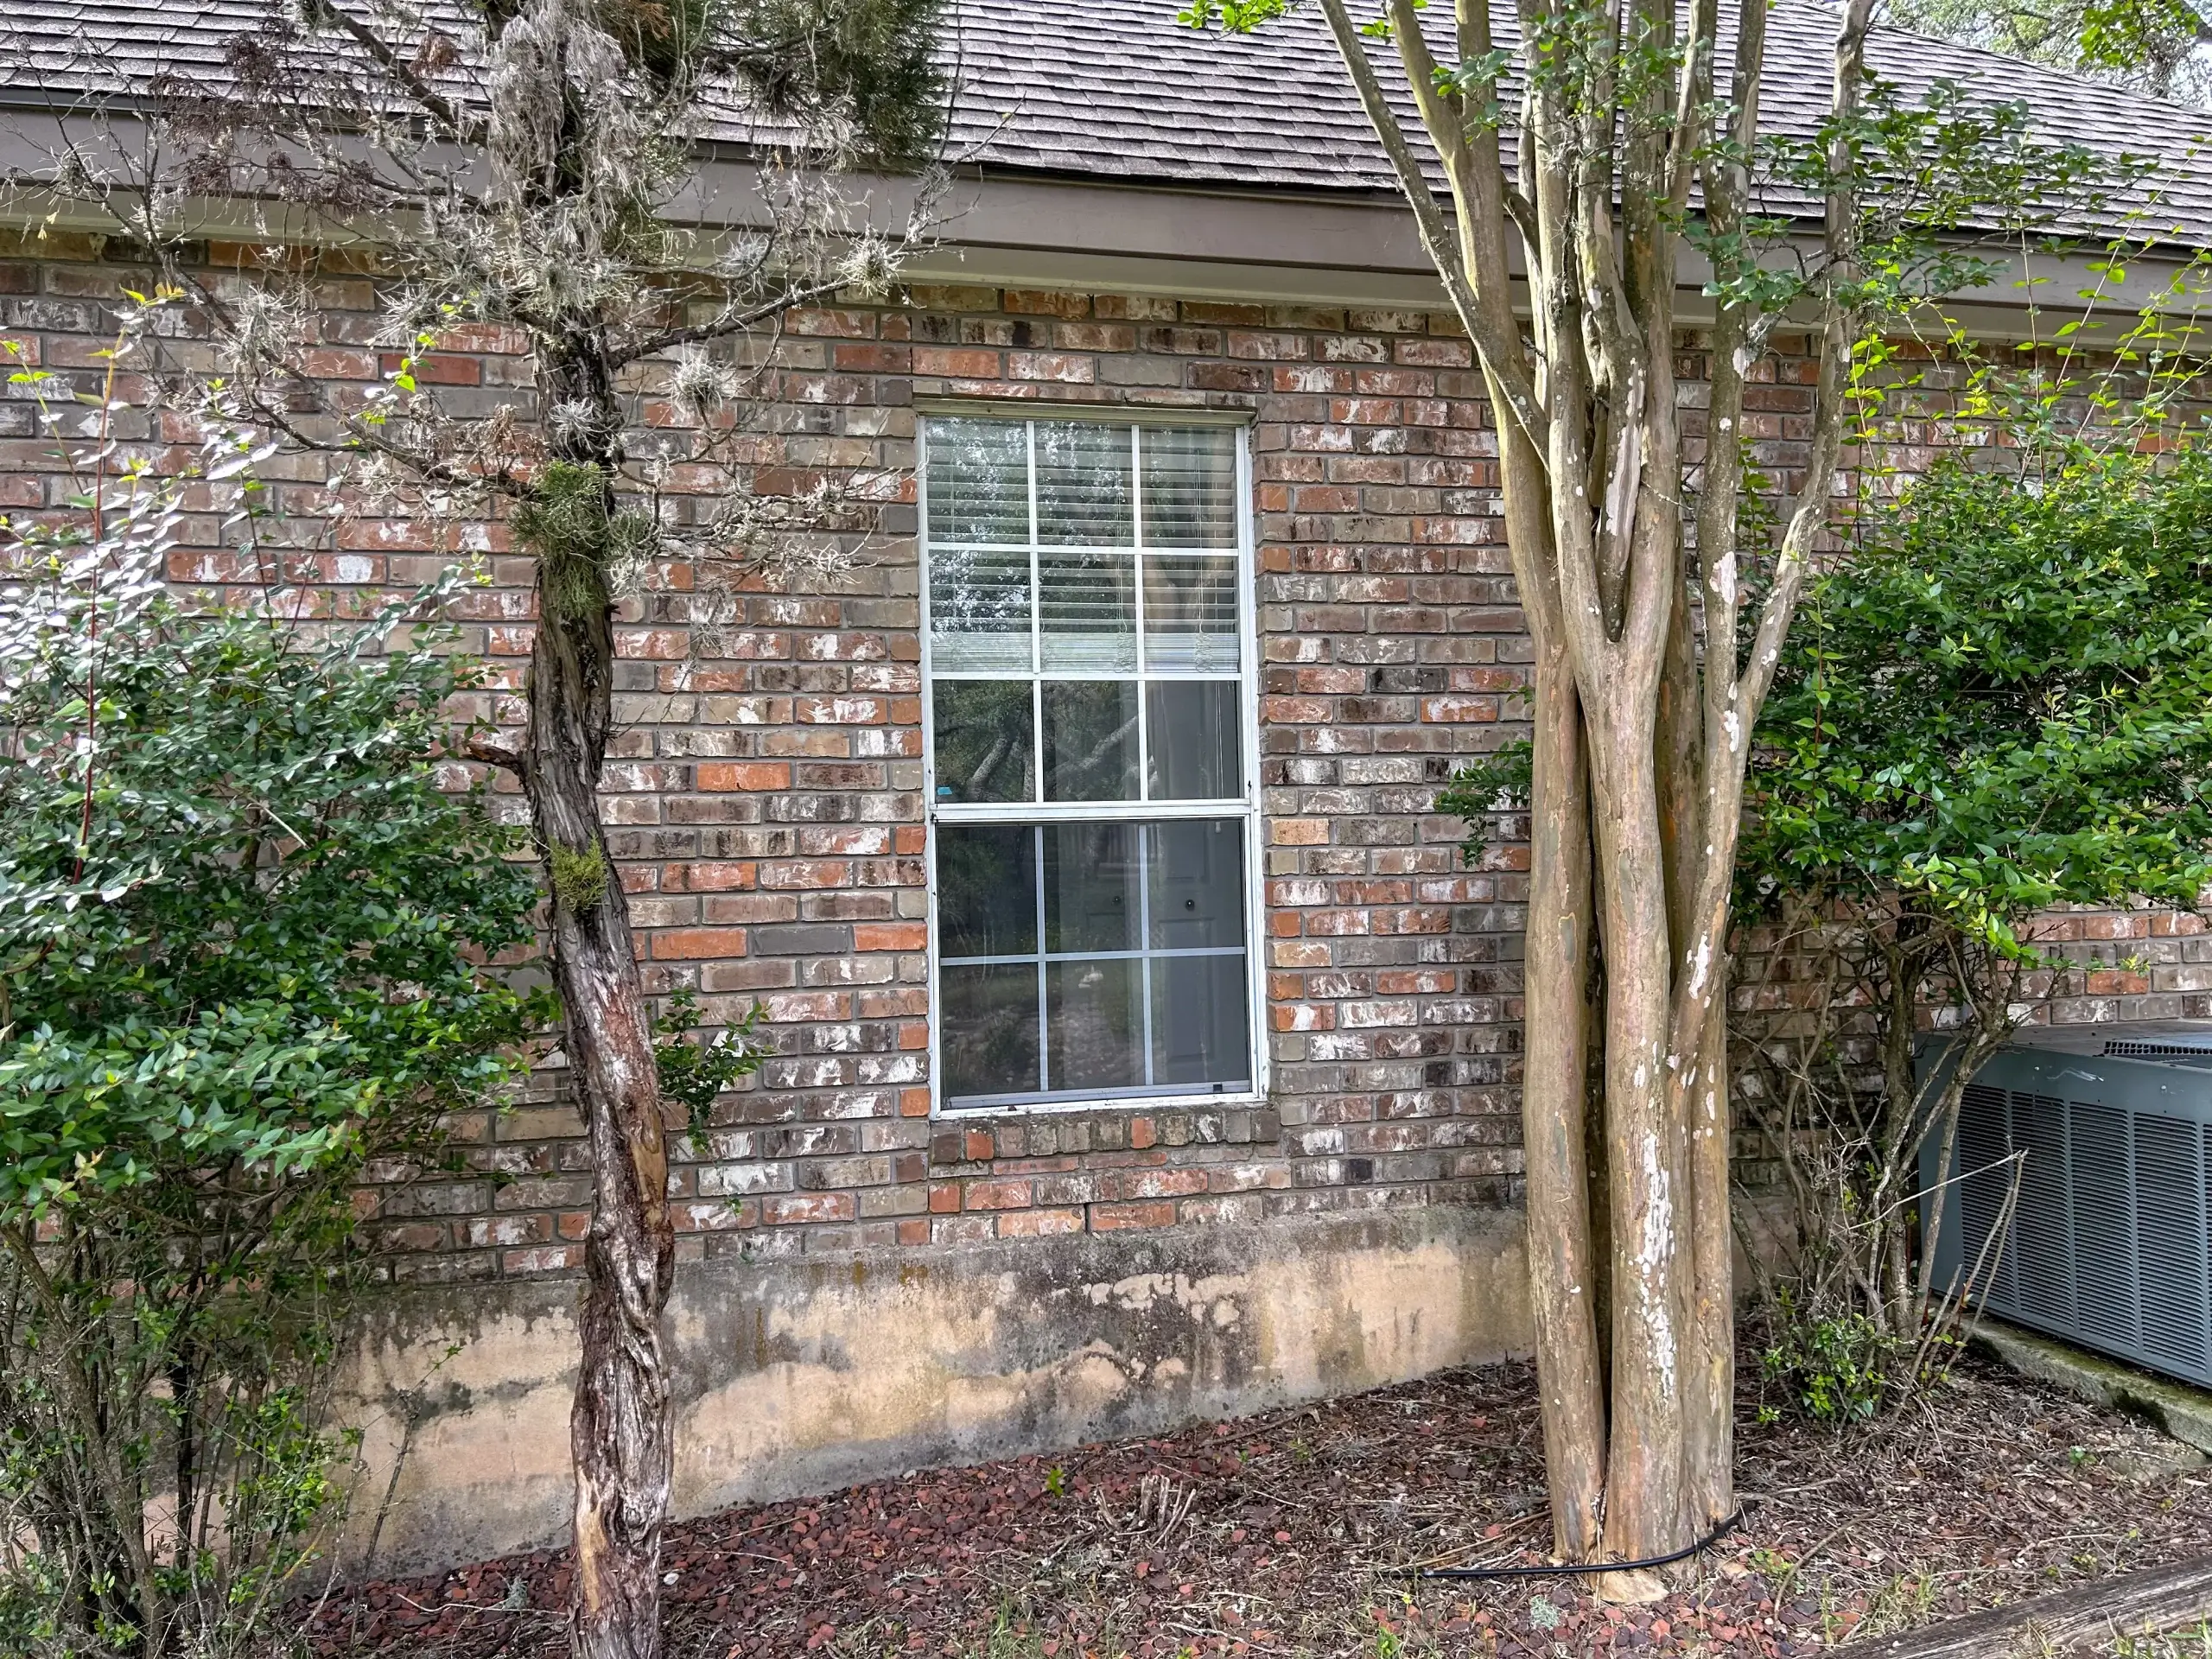 Old window on a brick house with overgrown trees partially obscuring the view in San Antonio.